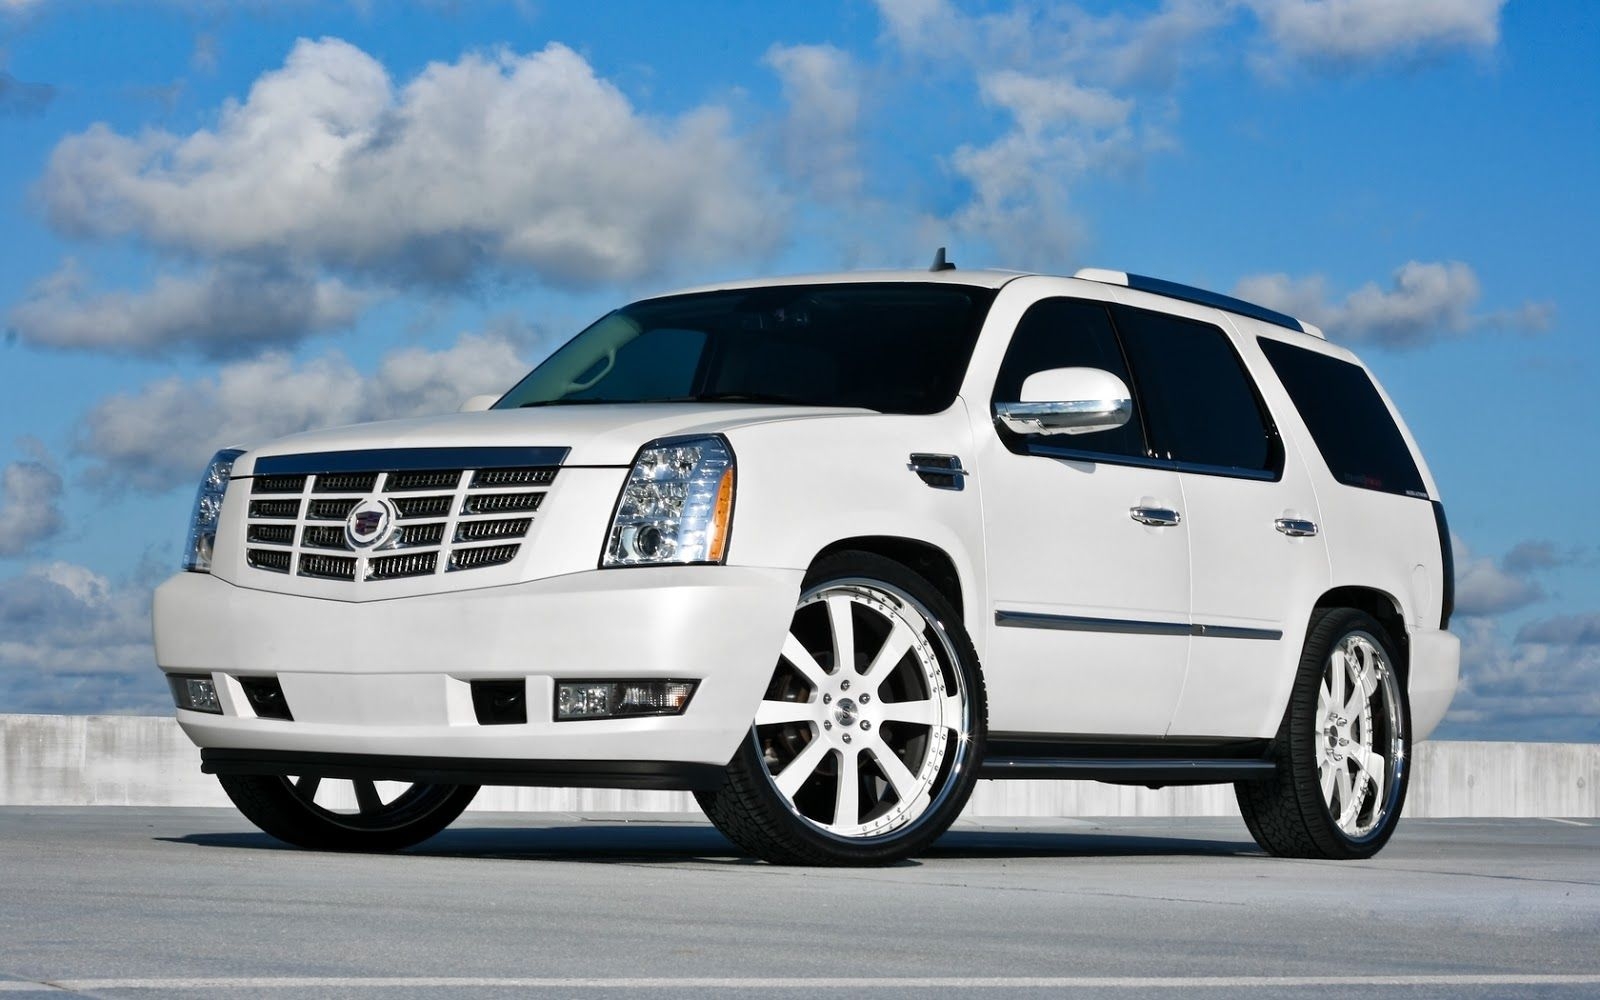 Cadillac Escalade - Cadillac Escalade Car Hd , HD Wallpaper & Backgrounds